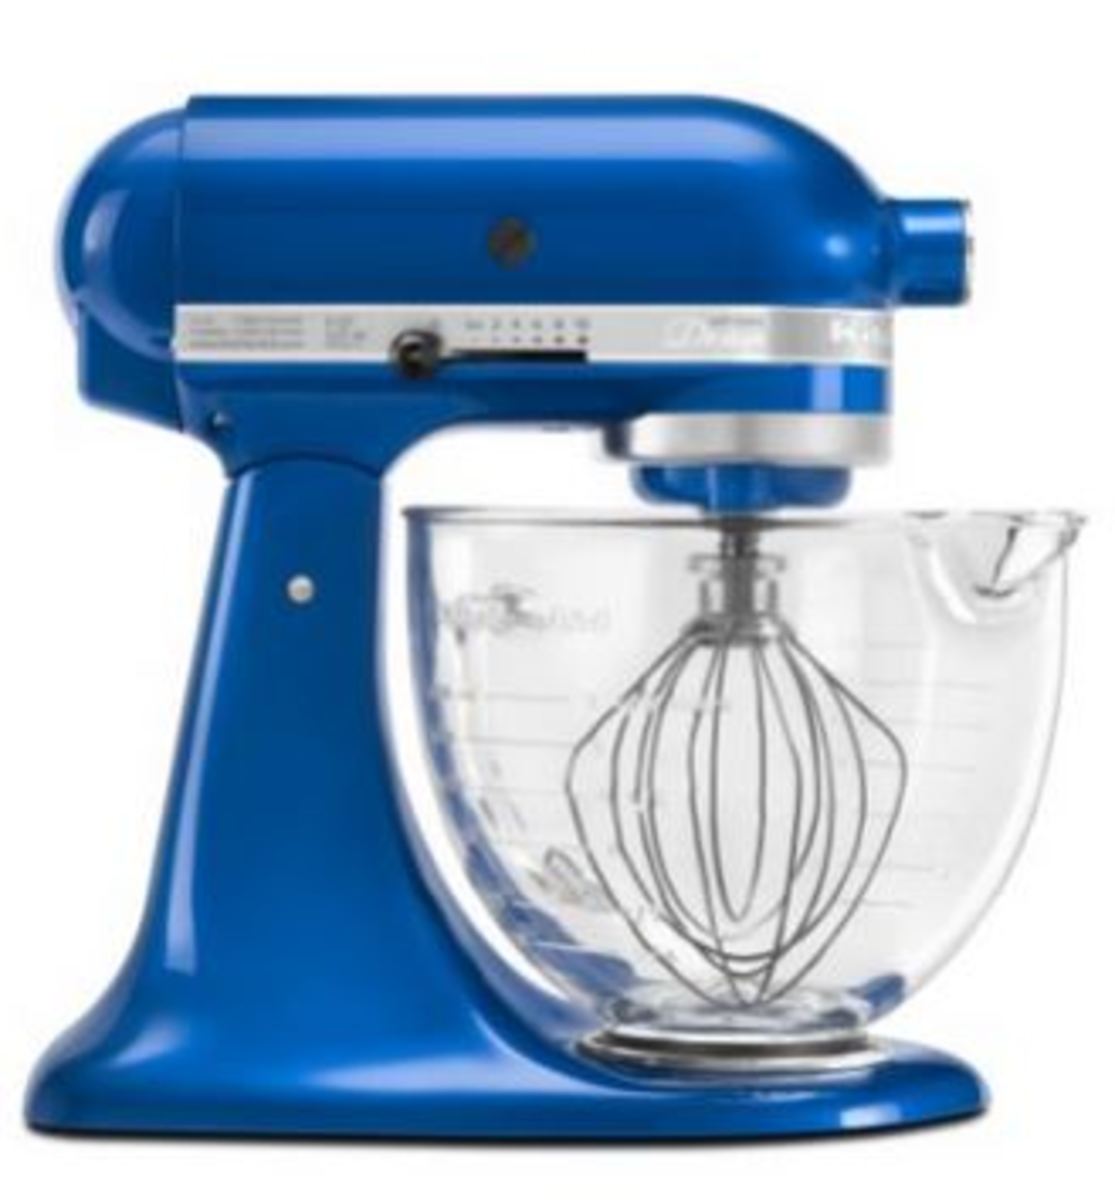 Colorful Small Kitchen Appliances 